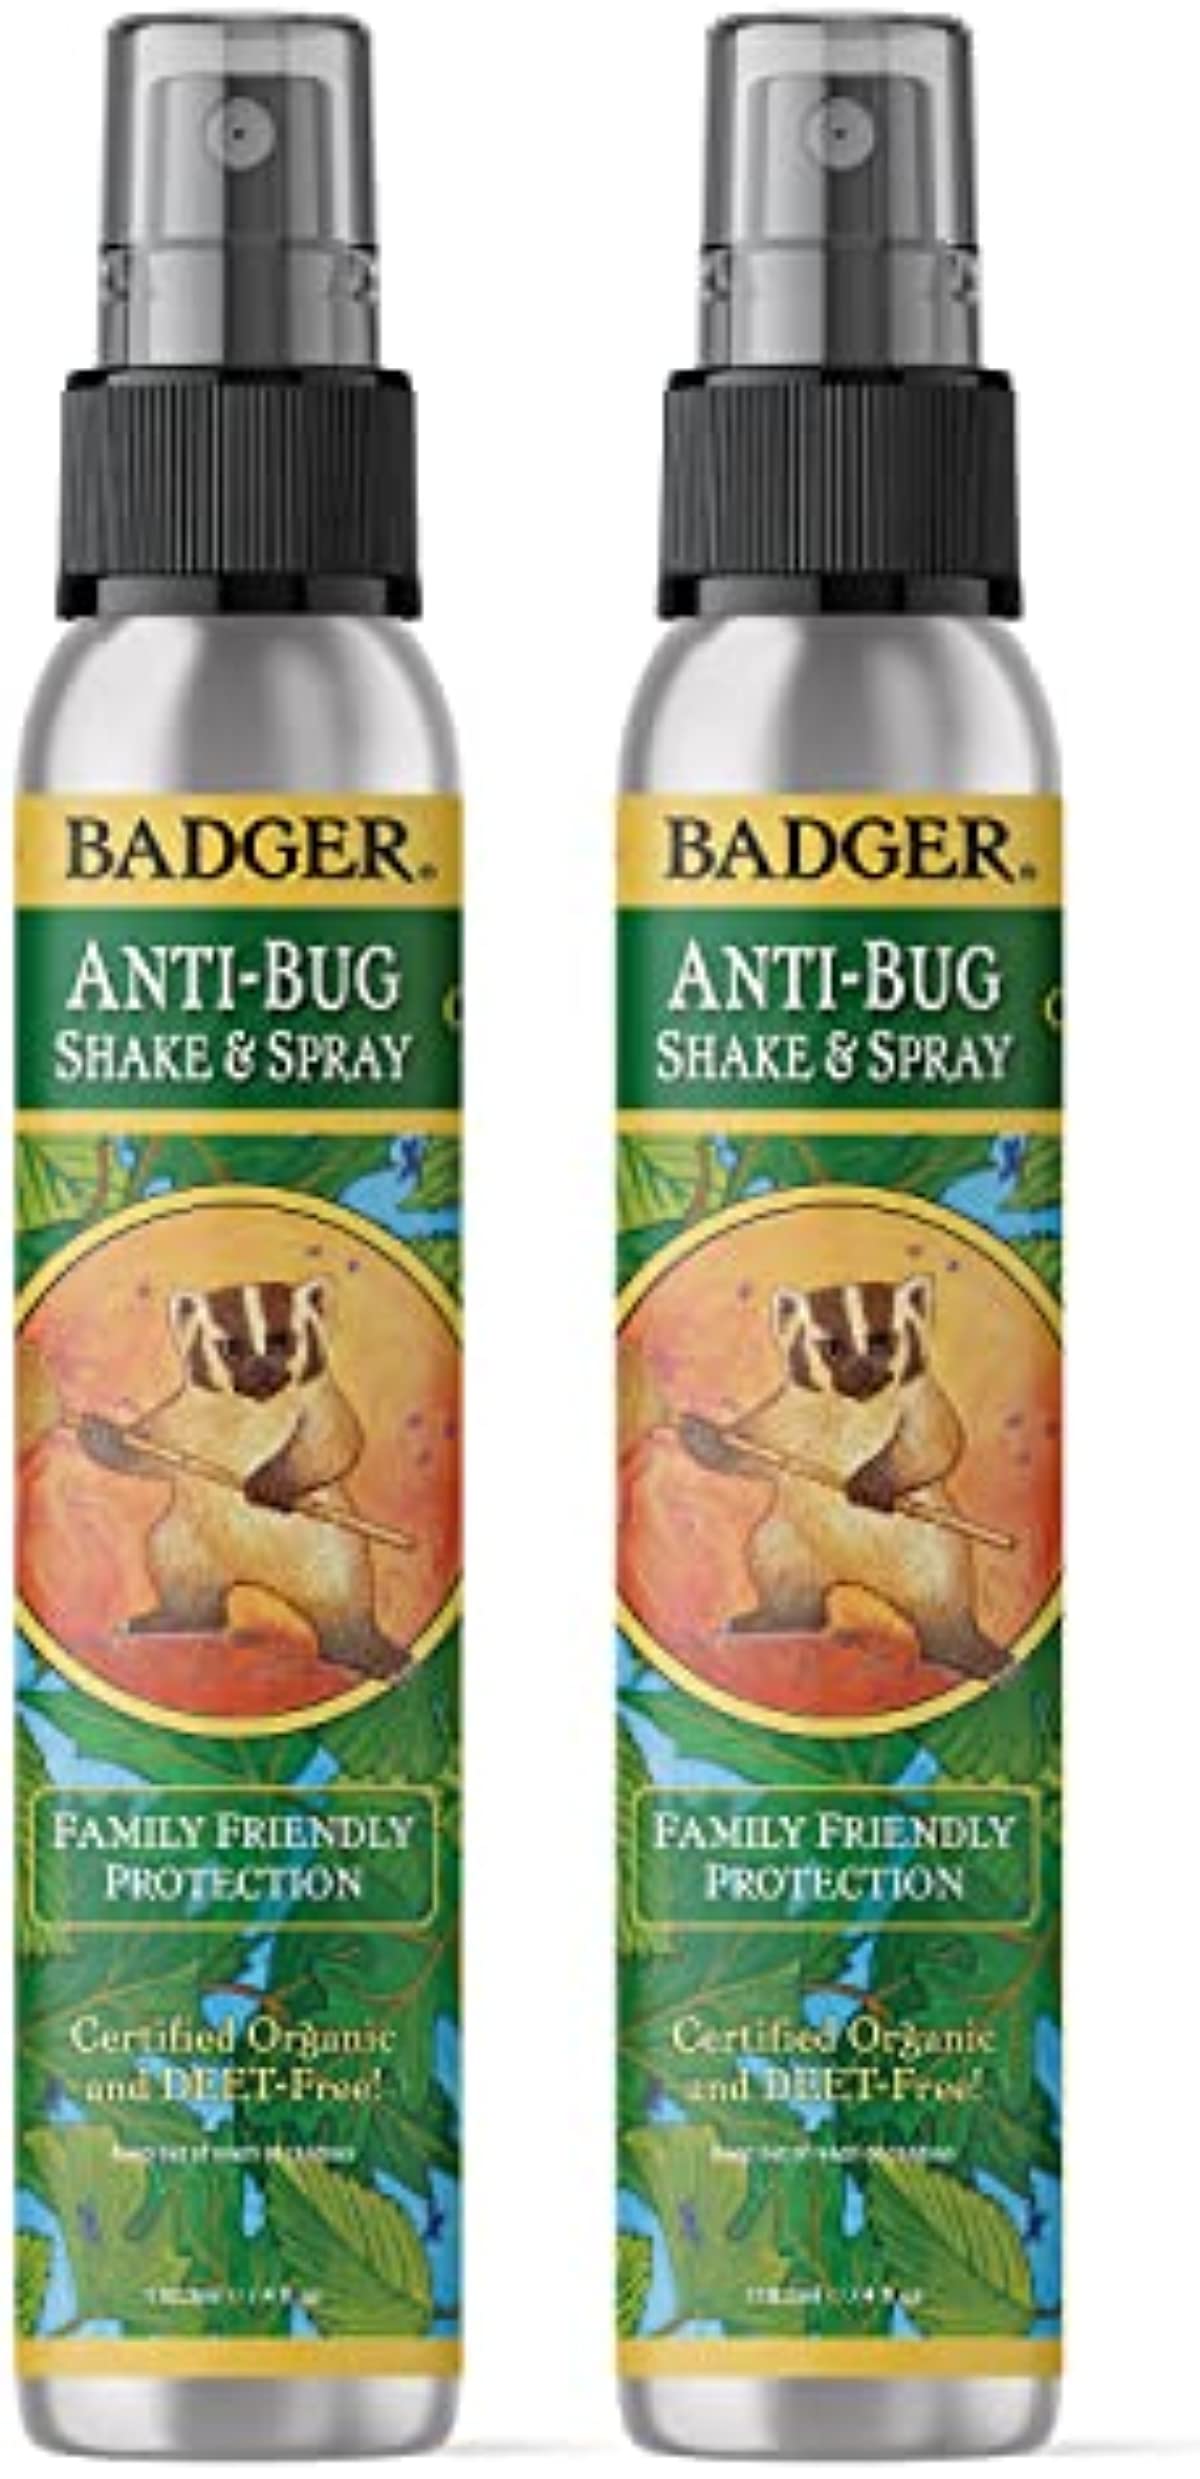 Badger - Anti-Bug Shake & Spray, DEET-Free Natural Bug Spray, Eco-Friendly, Certified Organic Mosquito Spray, Great for Kids, Insect Repellent, 4 Fl Oz (2 Pack)